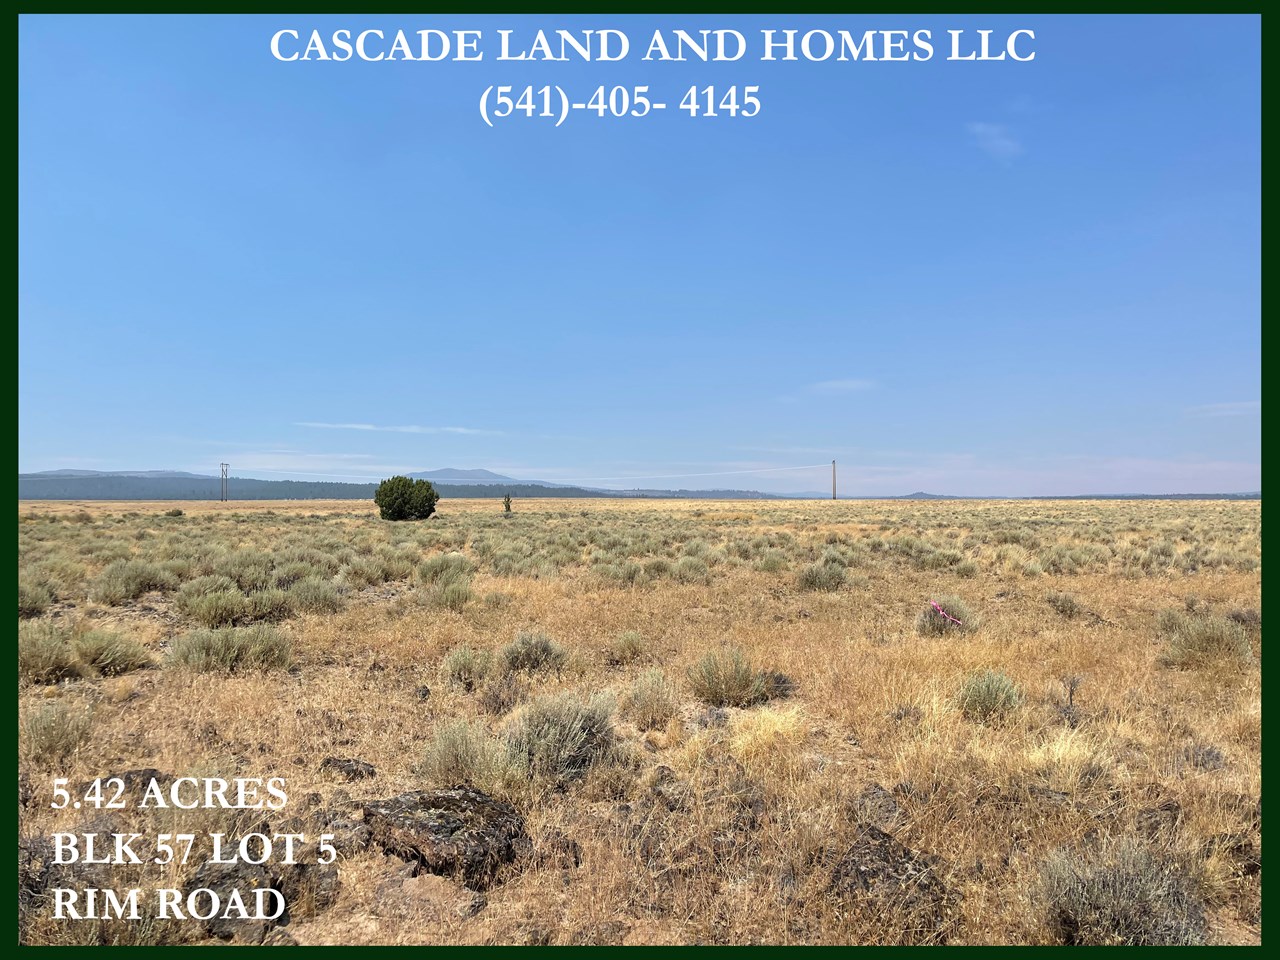 this large, 5.42~acre property sits high on a plateau above the sprague river valley. it has an old west vibe out here, a feeling of freedom, a place to get away from a busy lifestyle and relax, surrounded by wilderness. there is plenty of wide-open space here, and the area gets over 300 days of sunshine per year, so many people opt for living off-grid with solar power. maybe you are looking for a place in the country to have a few horses, maybe some chickens, rabbits, a garden or mini-farm. this might just be that place!